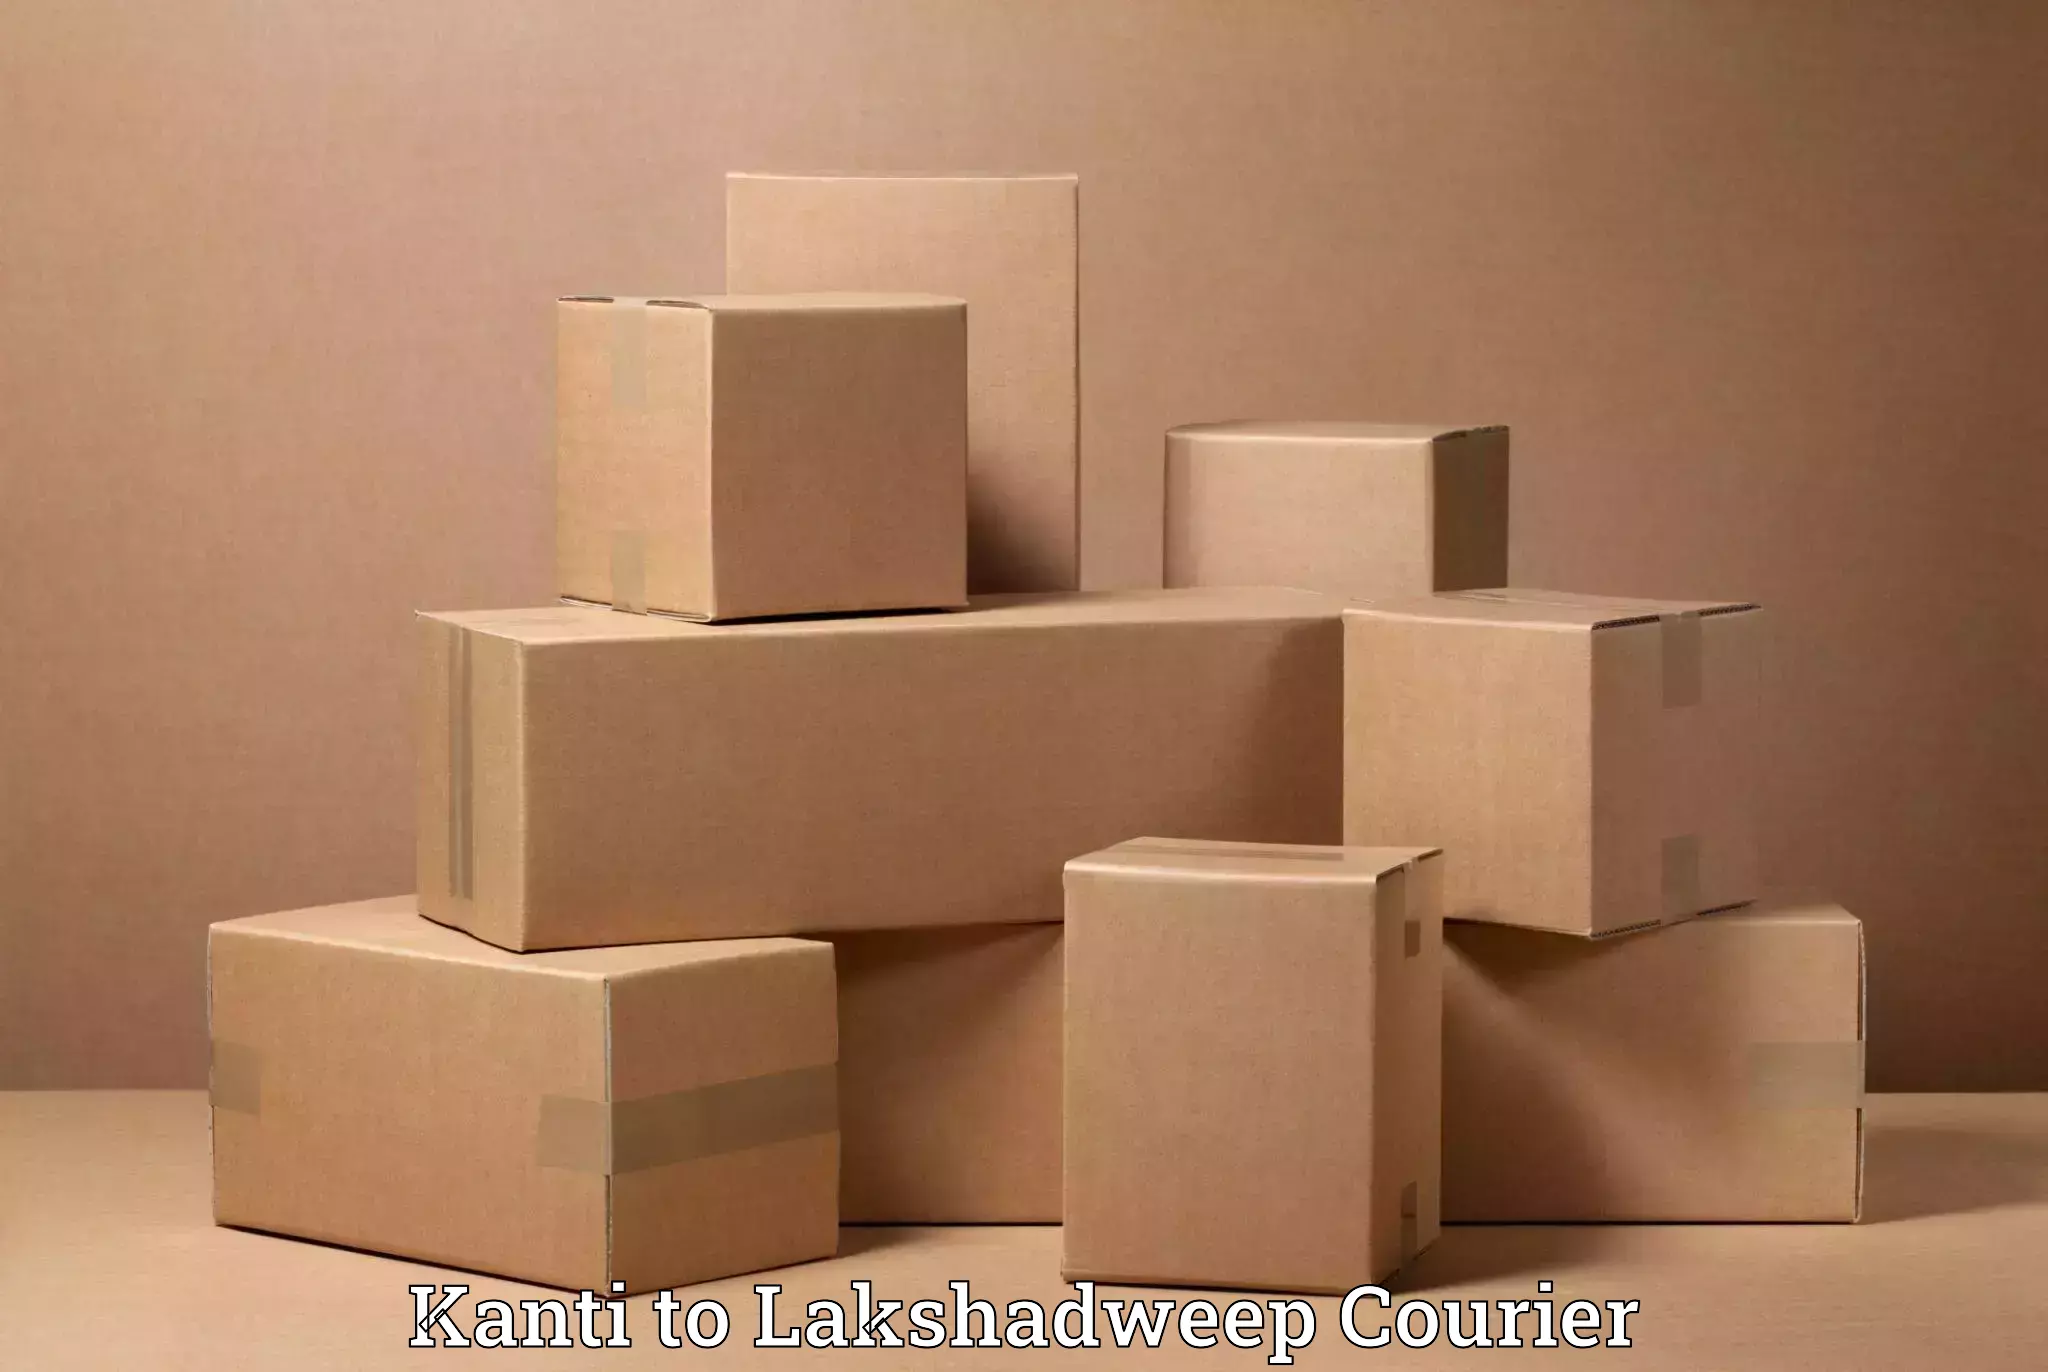 Quality moving and storage in Kanti to Lakshadweep